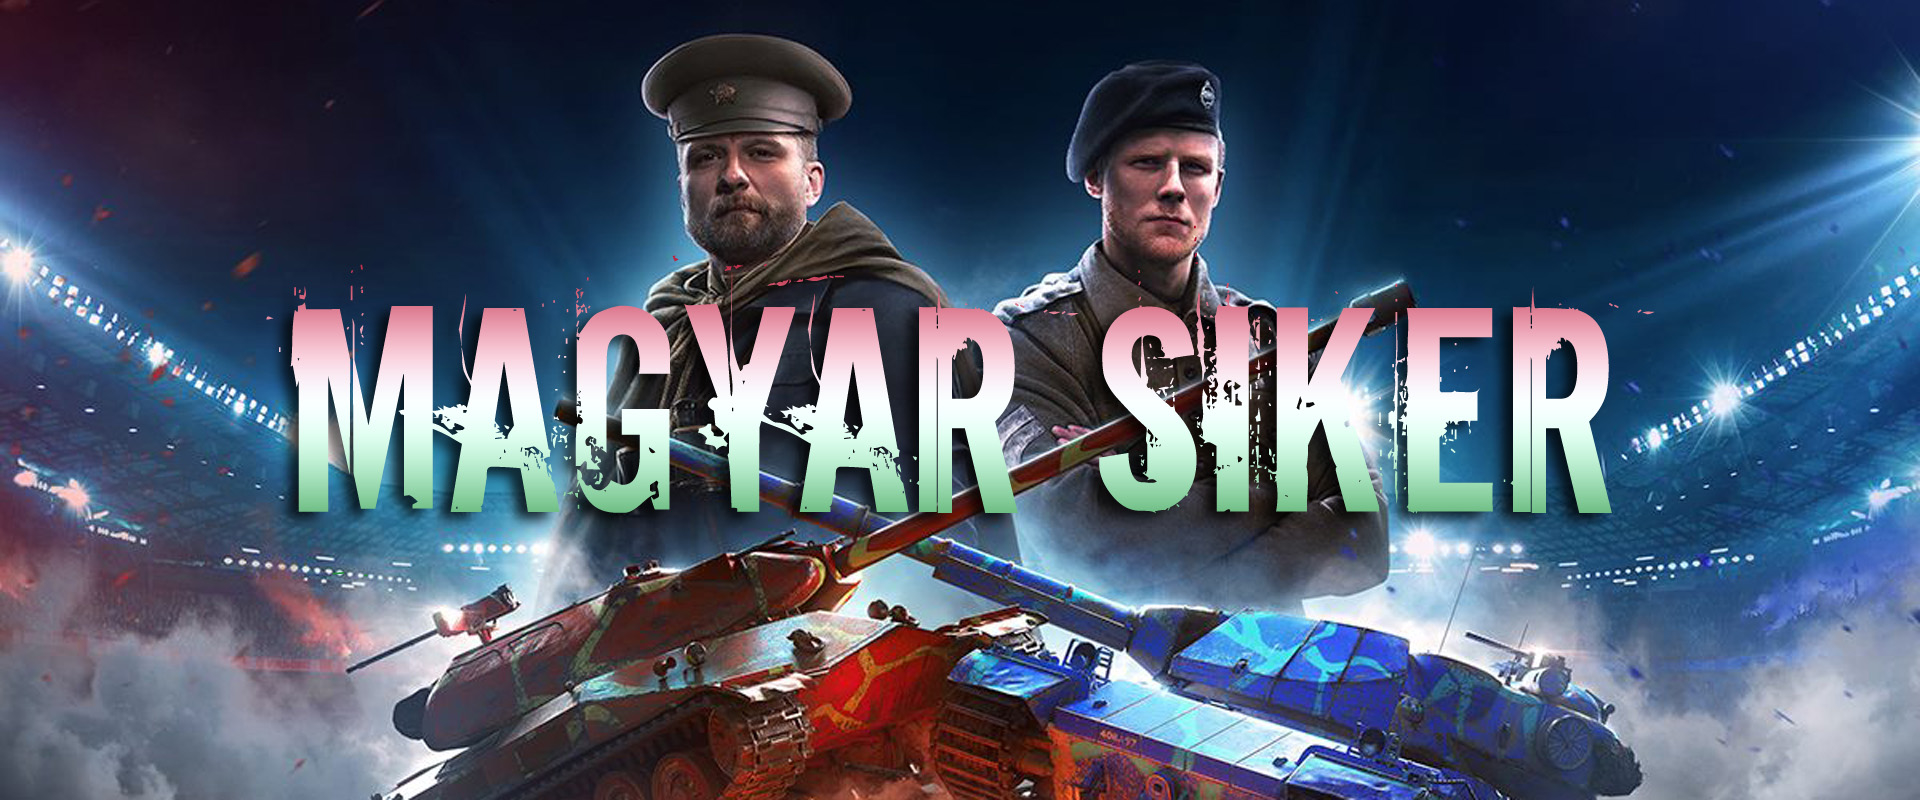 Újabb magyar siker a Soldiers of Fortune bajnokságon!